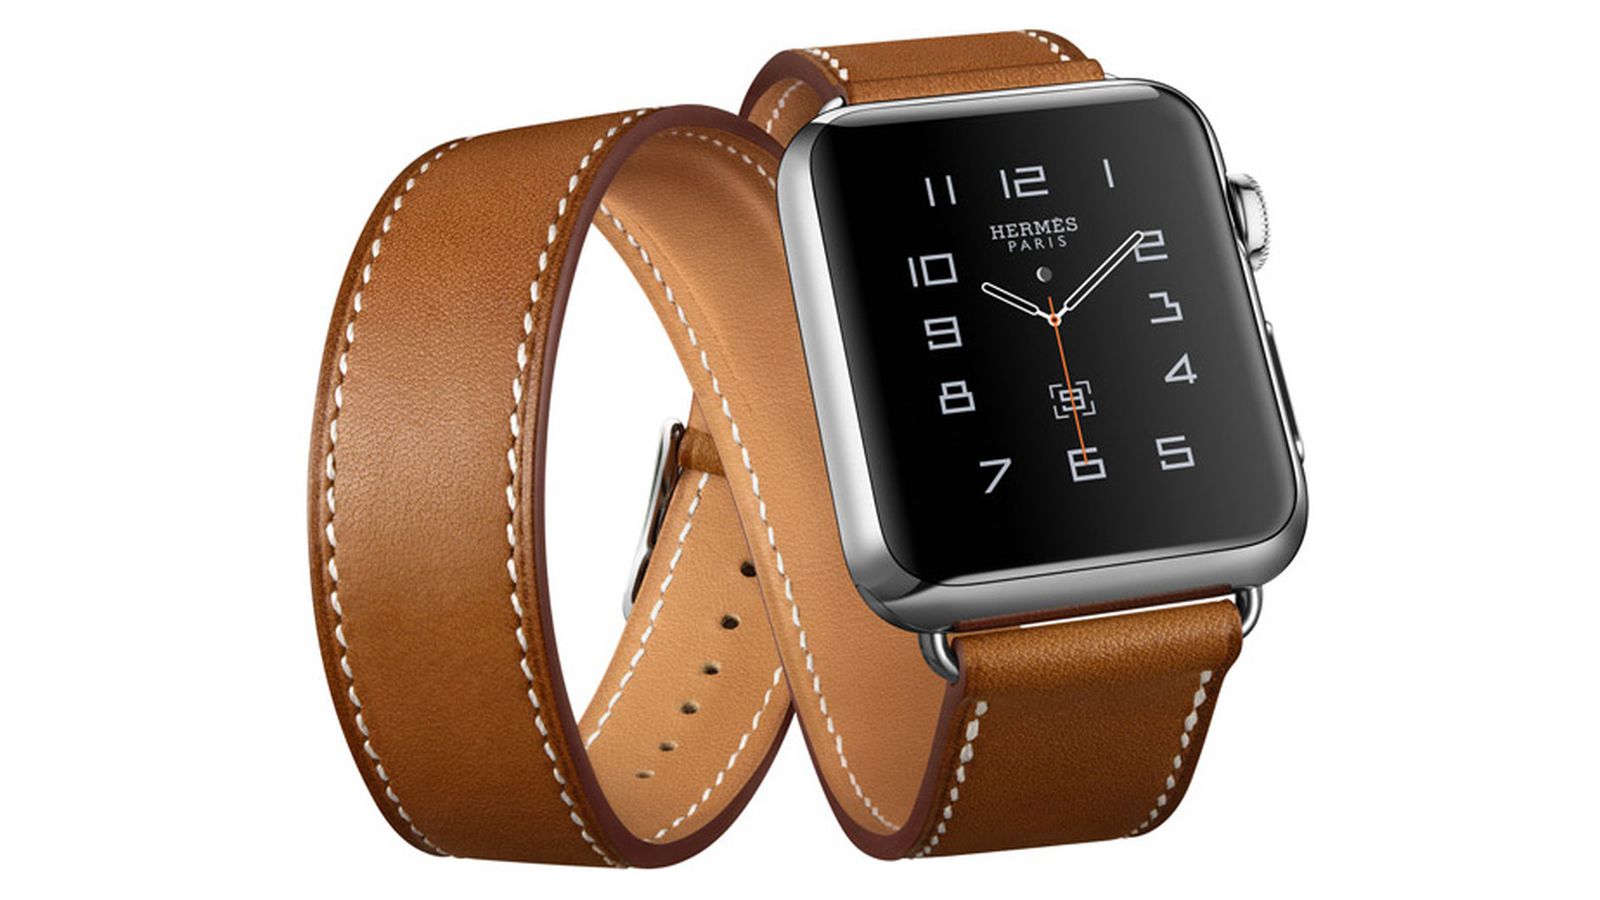 The Apple Watch Hermès is now available - The Verge